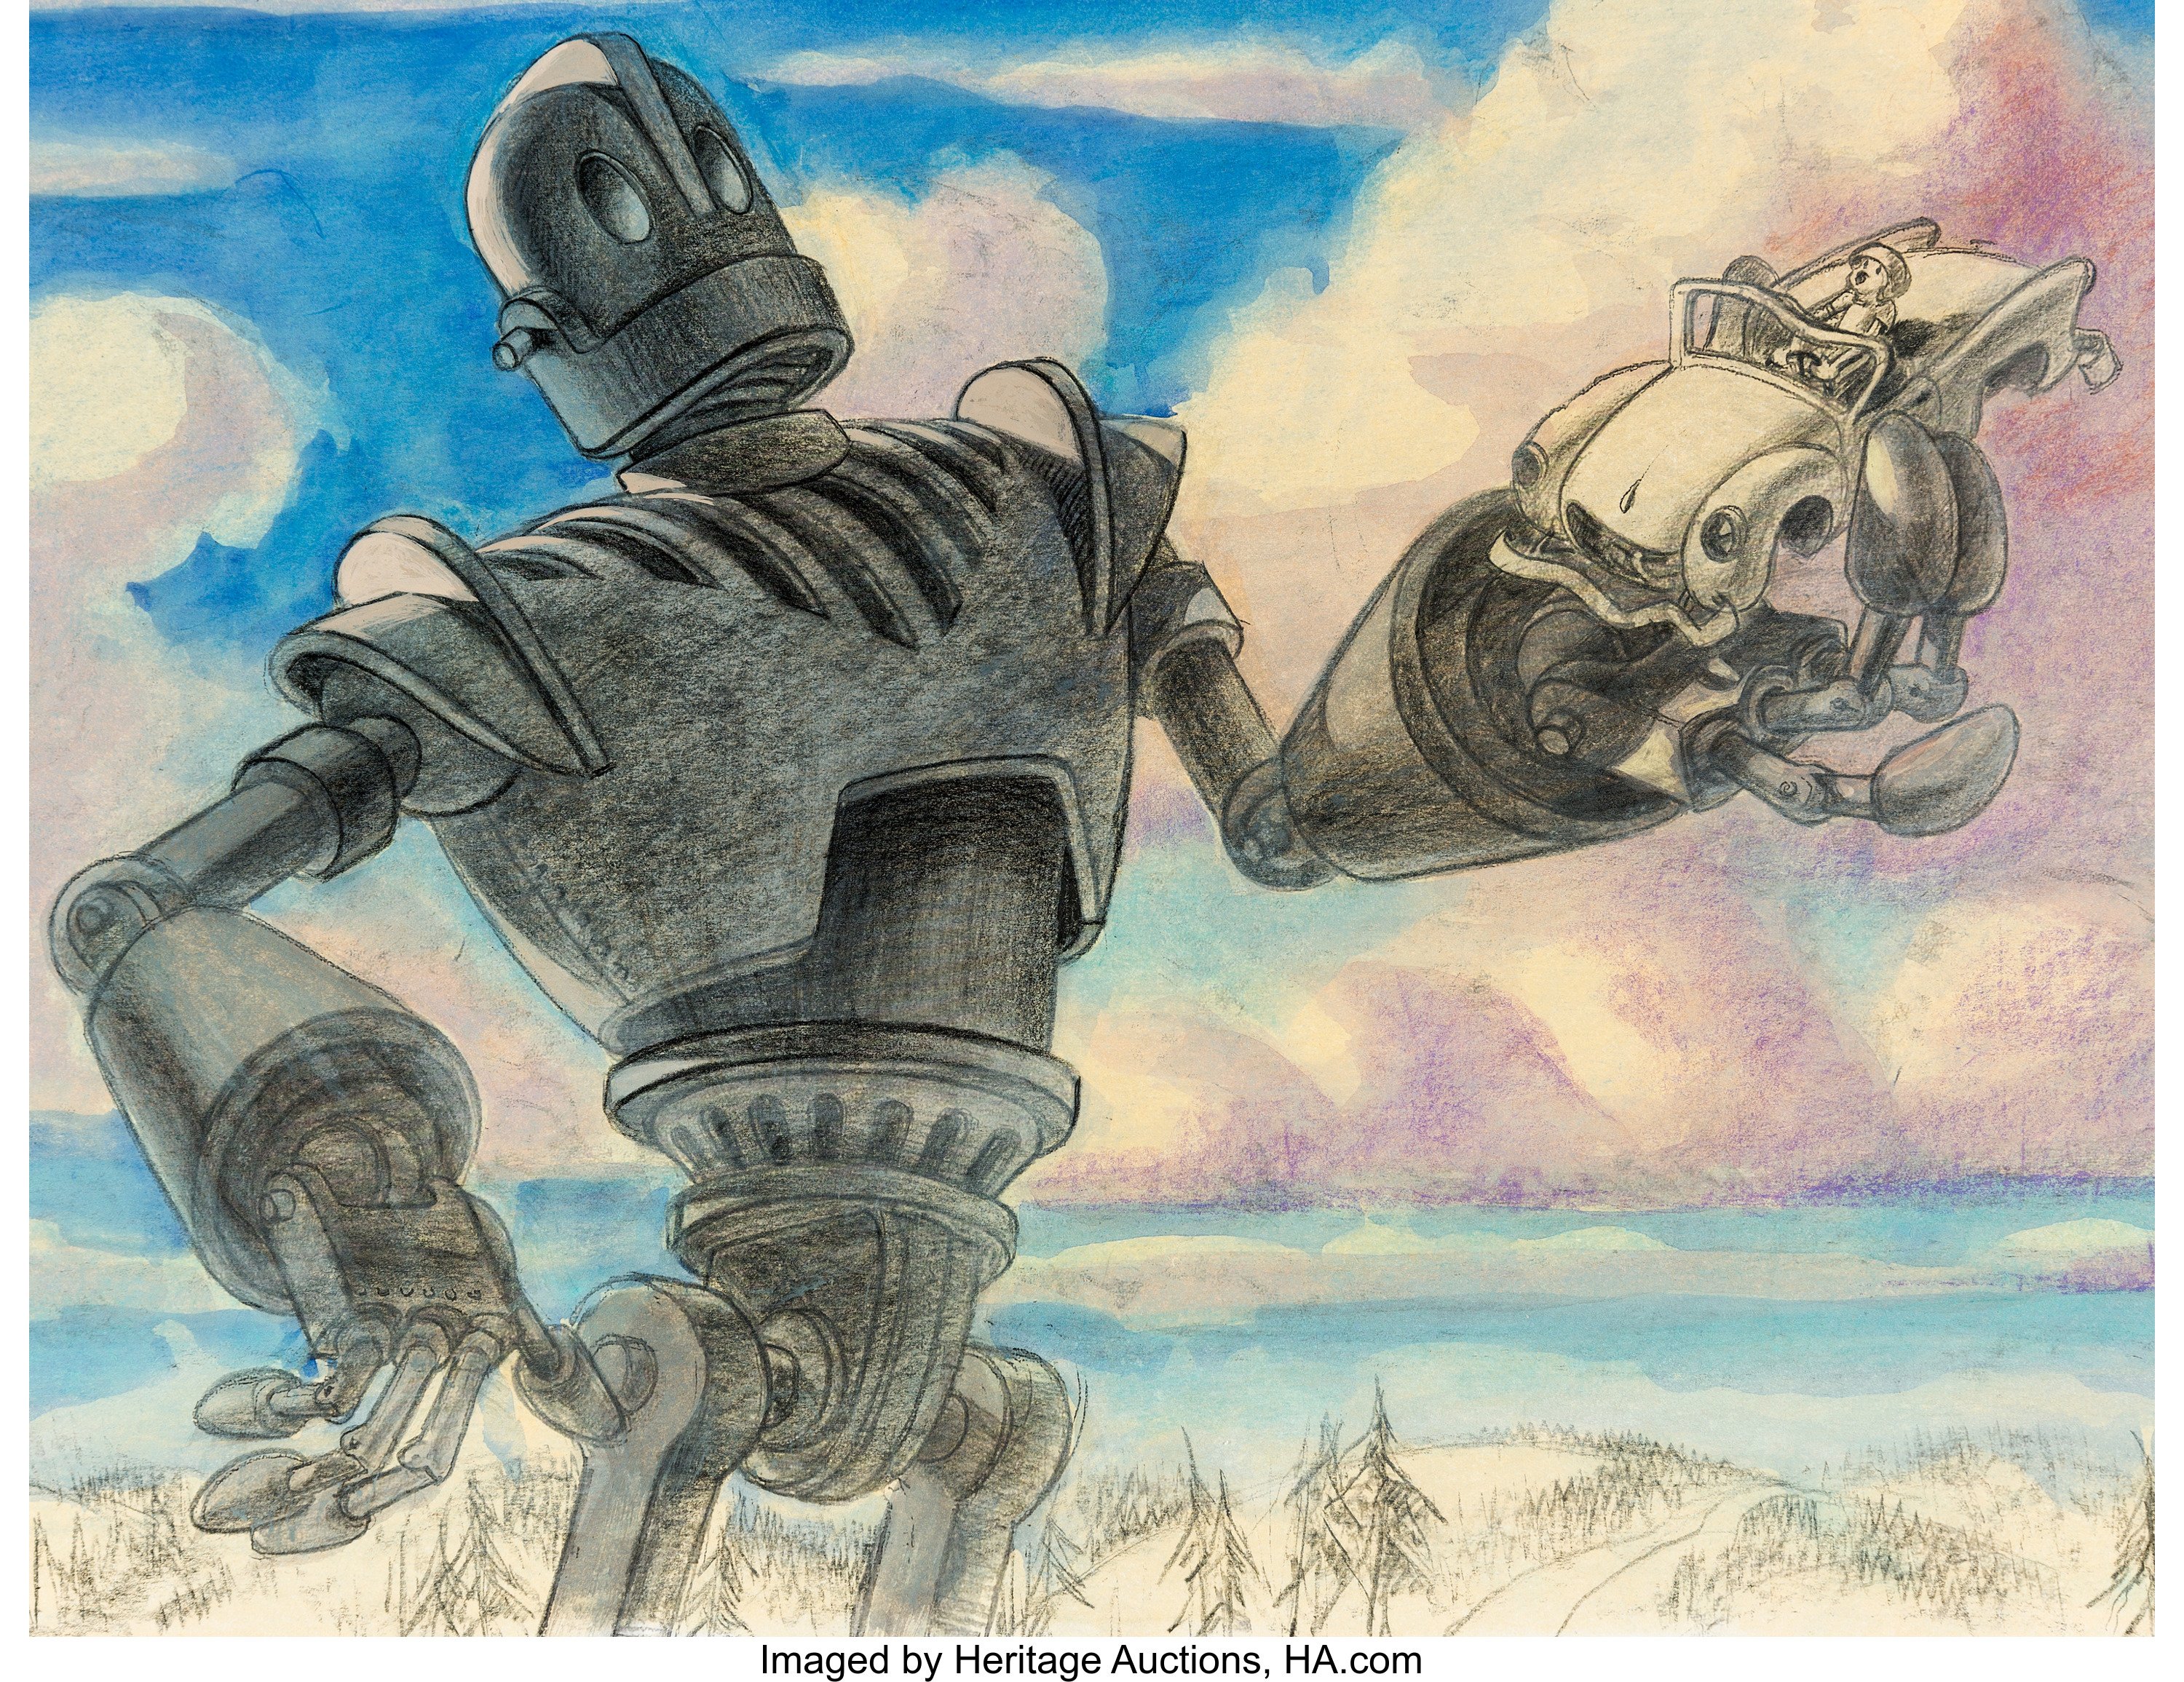 Heritage Auctions on X: "The Iron Giant Concept Art Warner